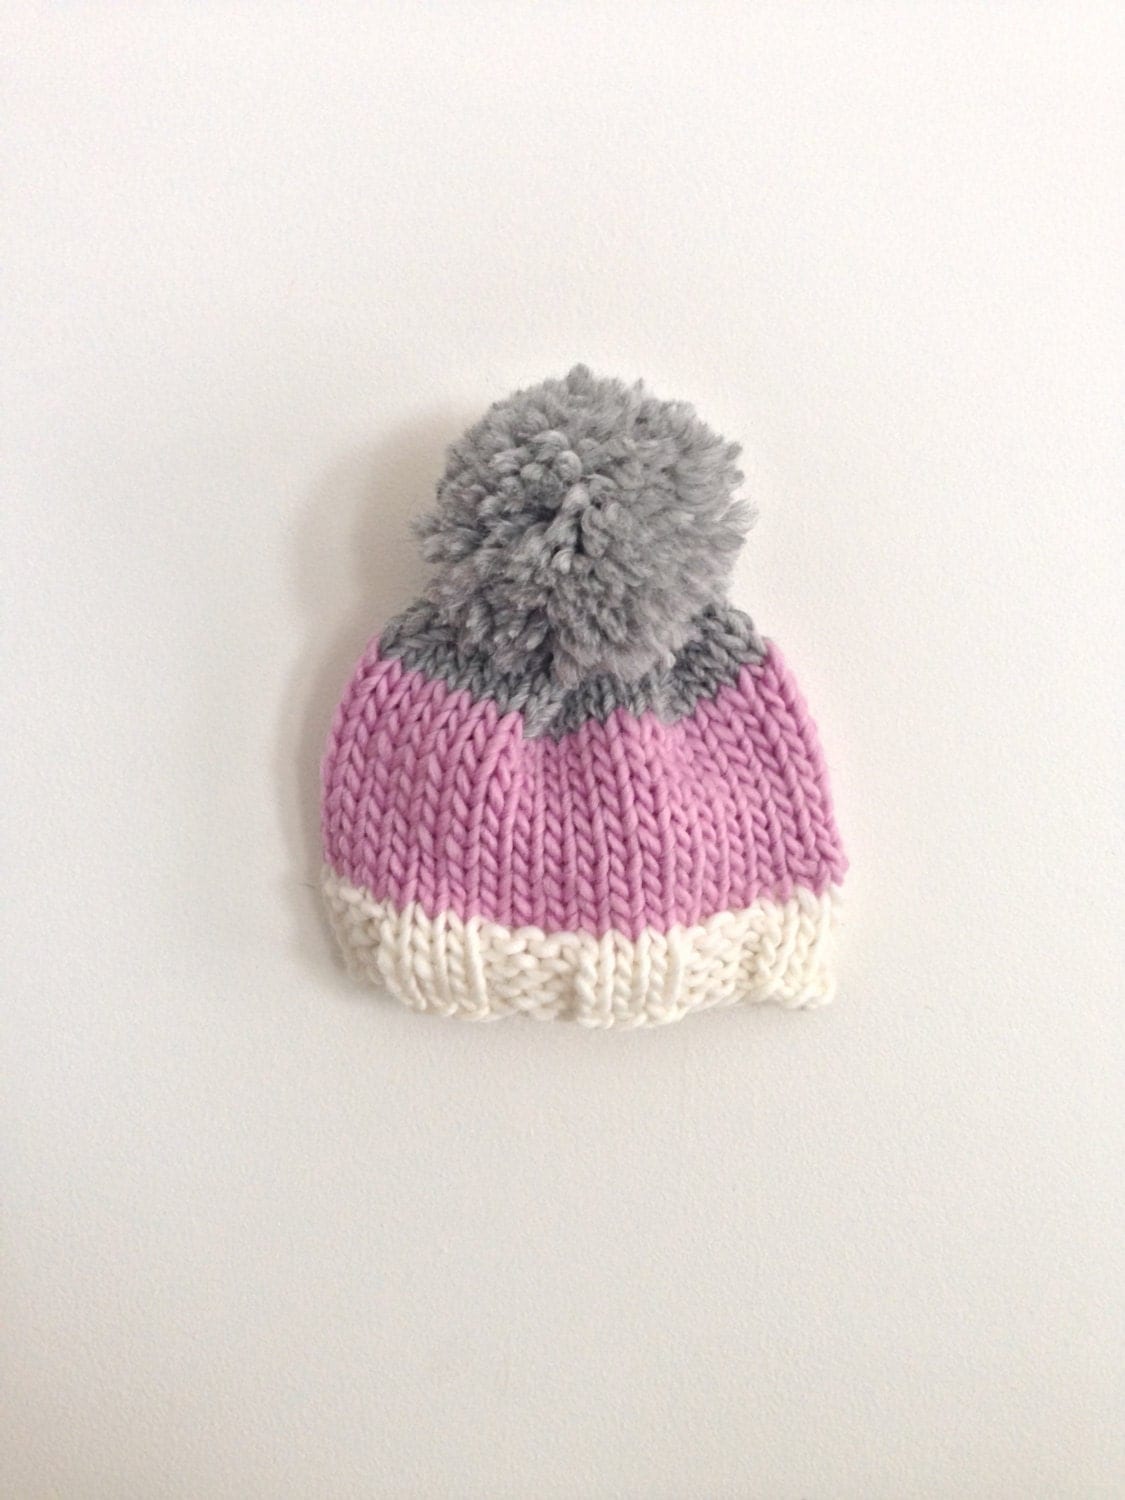 Baby Pom Pom Hat | Hand Knit Color Block Baby Hat with Large Pom Pom ...